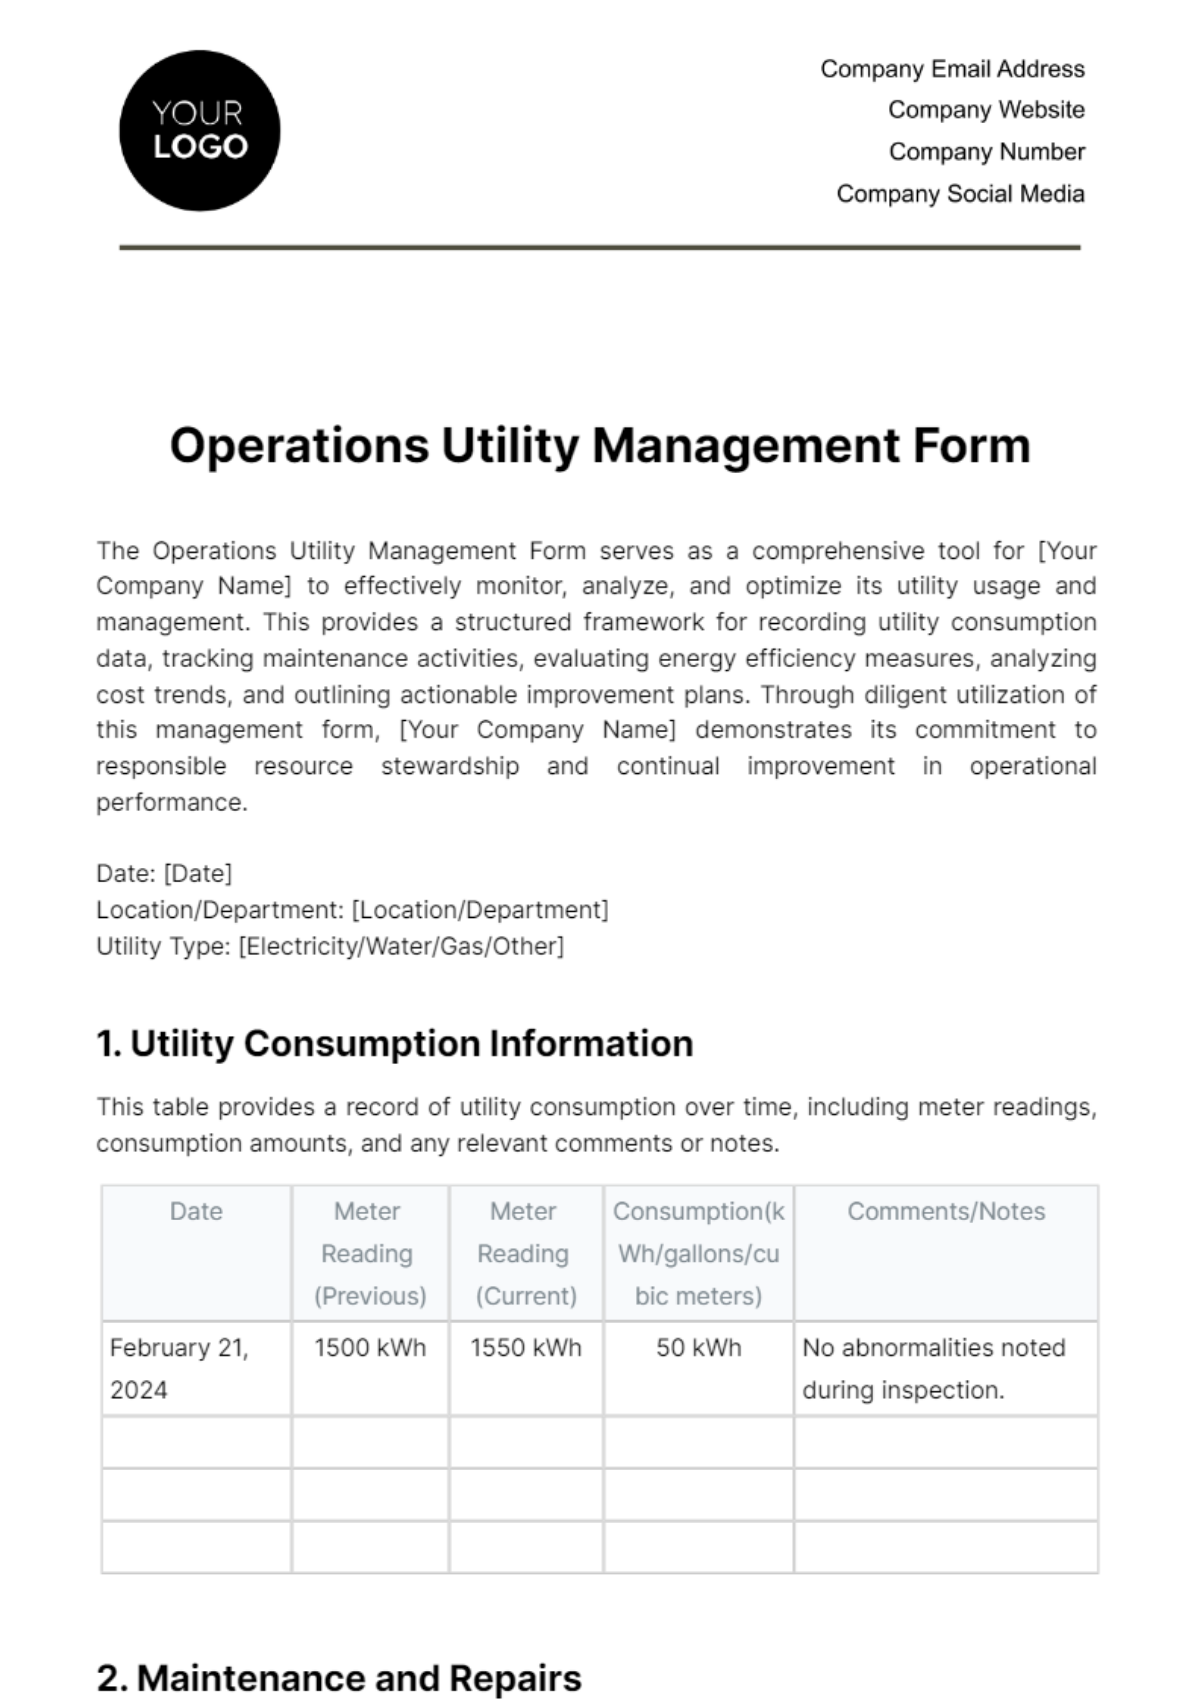 Operations Utility Management Form Template